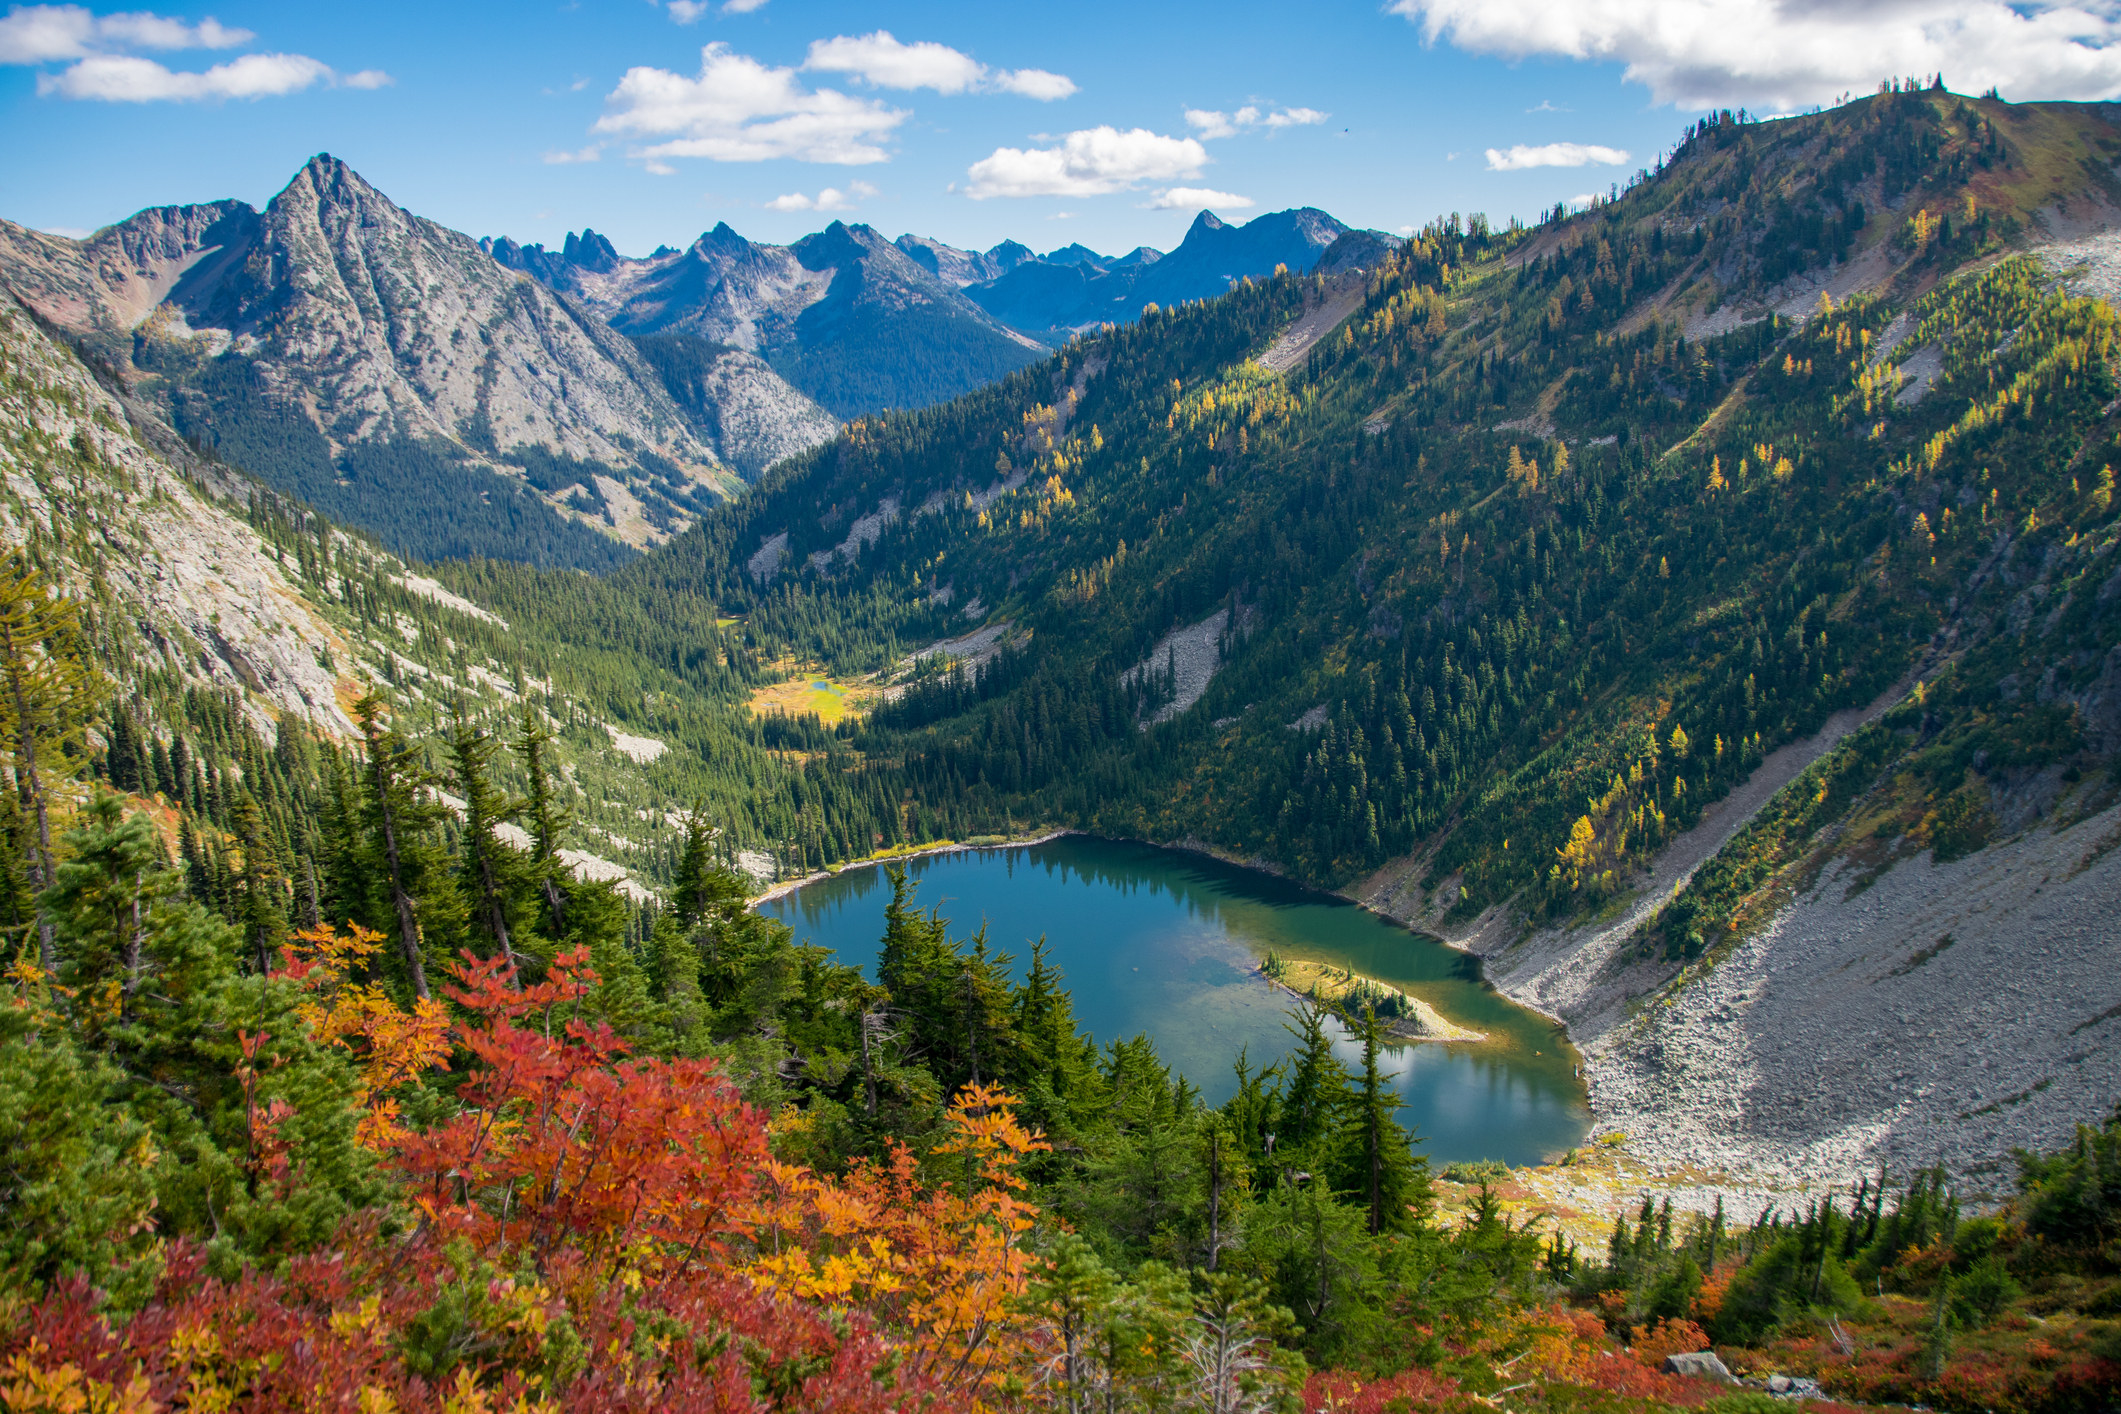 Looking down on beautiful Lake Ann surrounded by colorful fall foliage in Washington&#x27;s North Cascades in autumn.